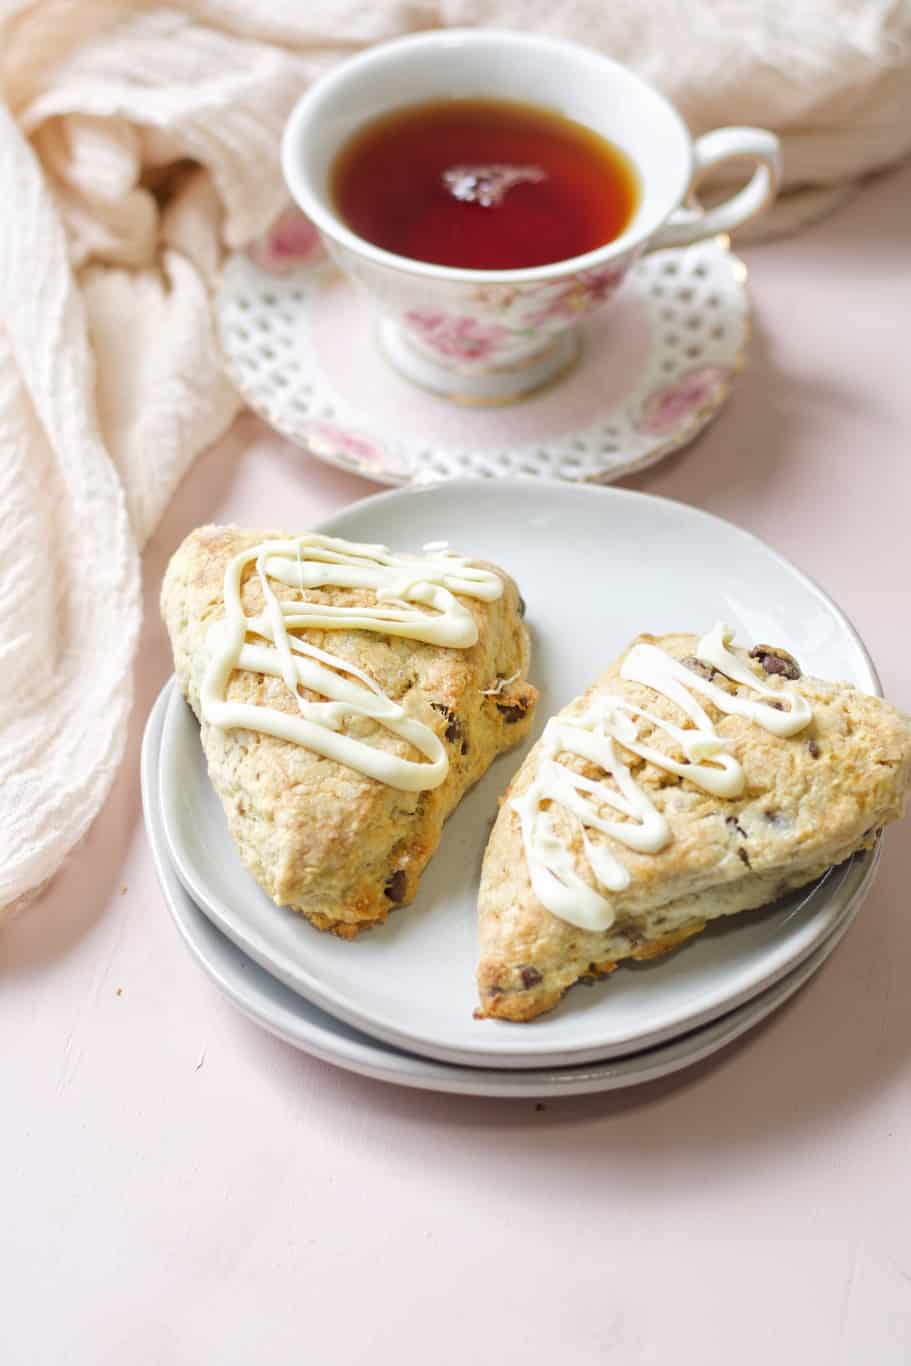 flaky dessert drizzled with melted white chocolate filled with chocolate chips and served with a cup of tea